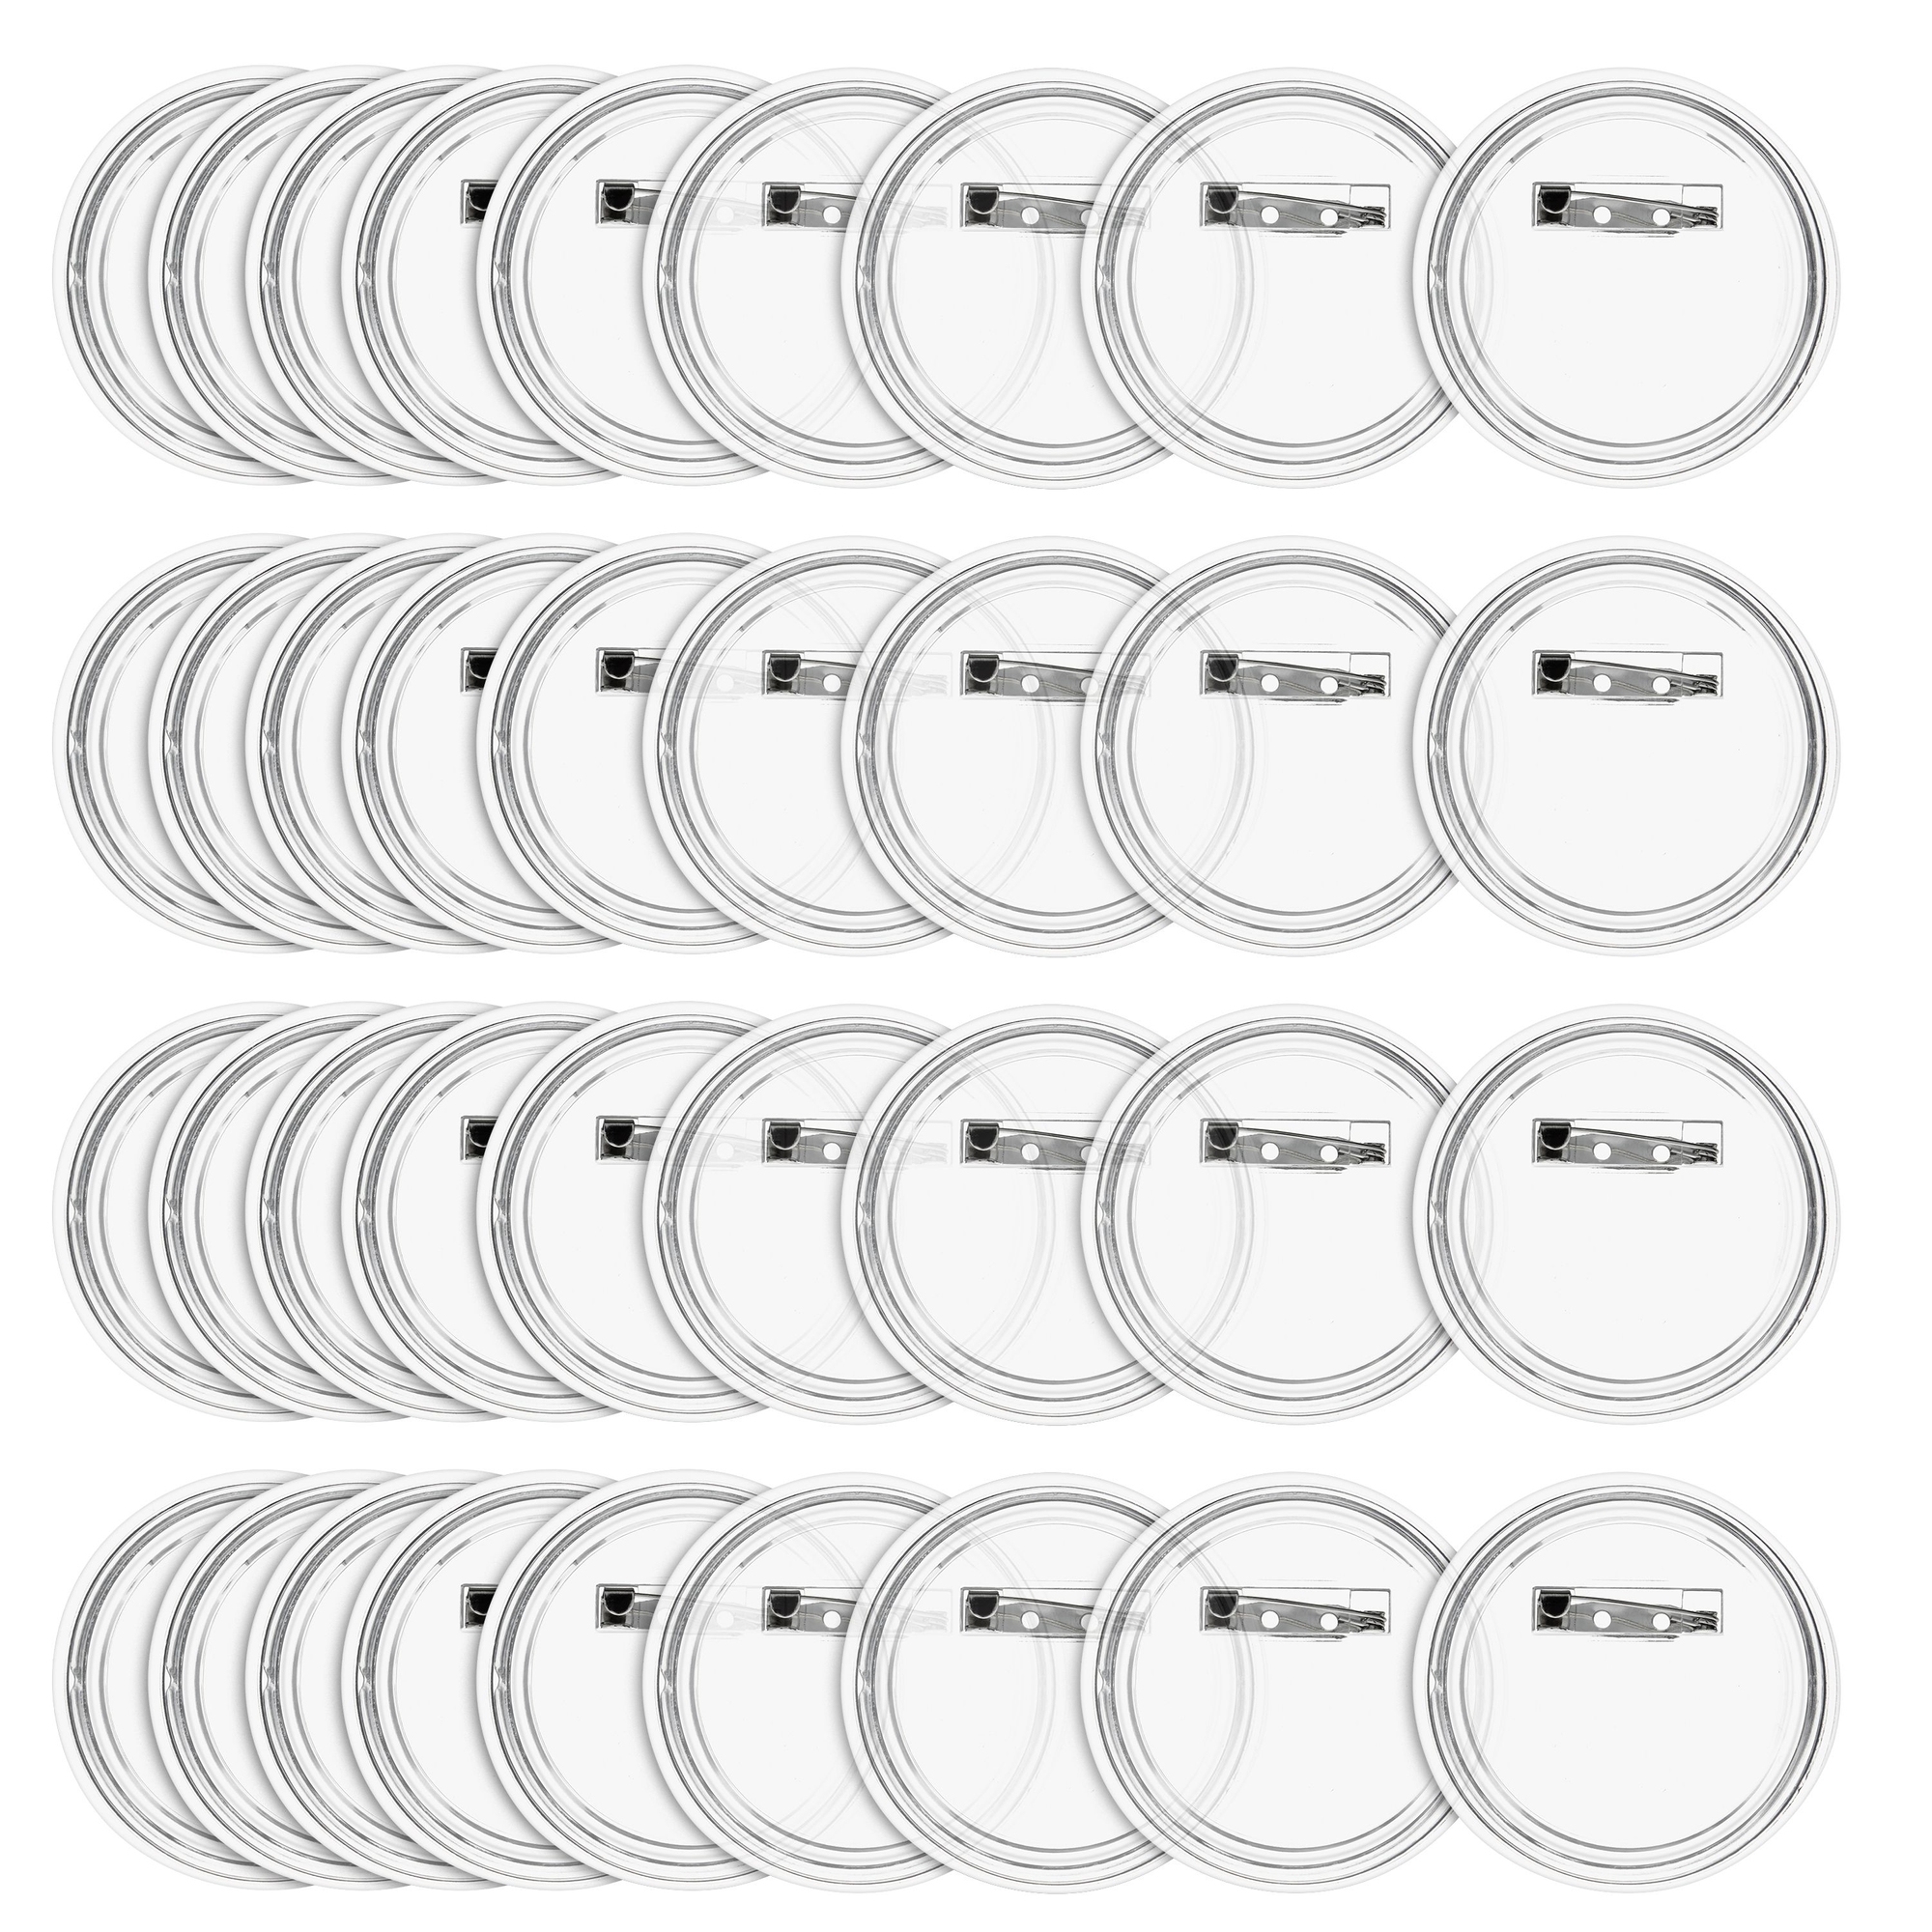 36 Pack Blank Button Pins for All Occasions, Clear Make Your Own